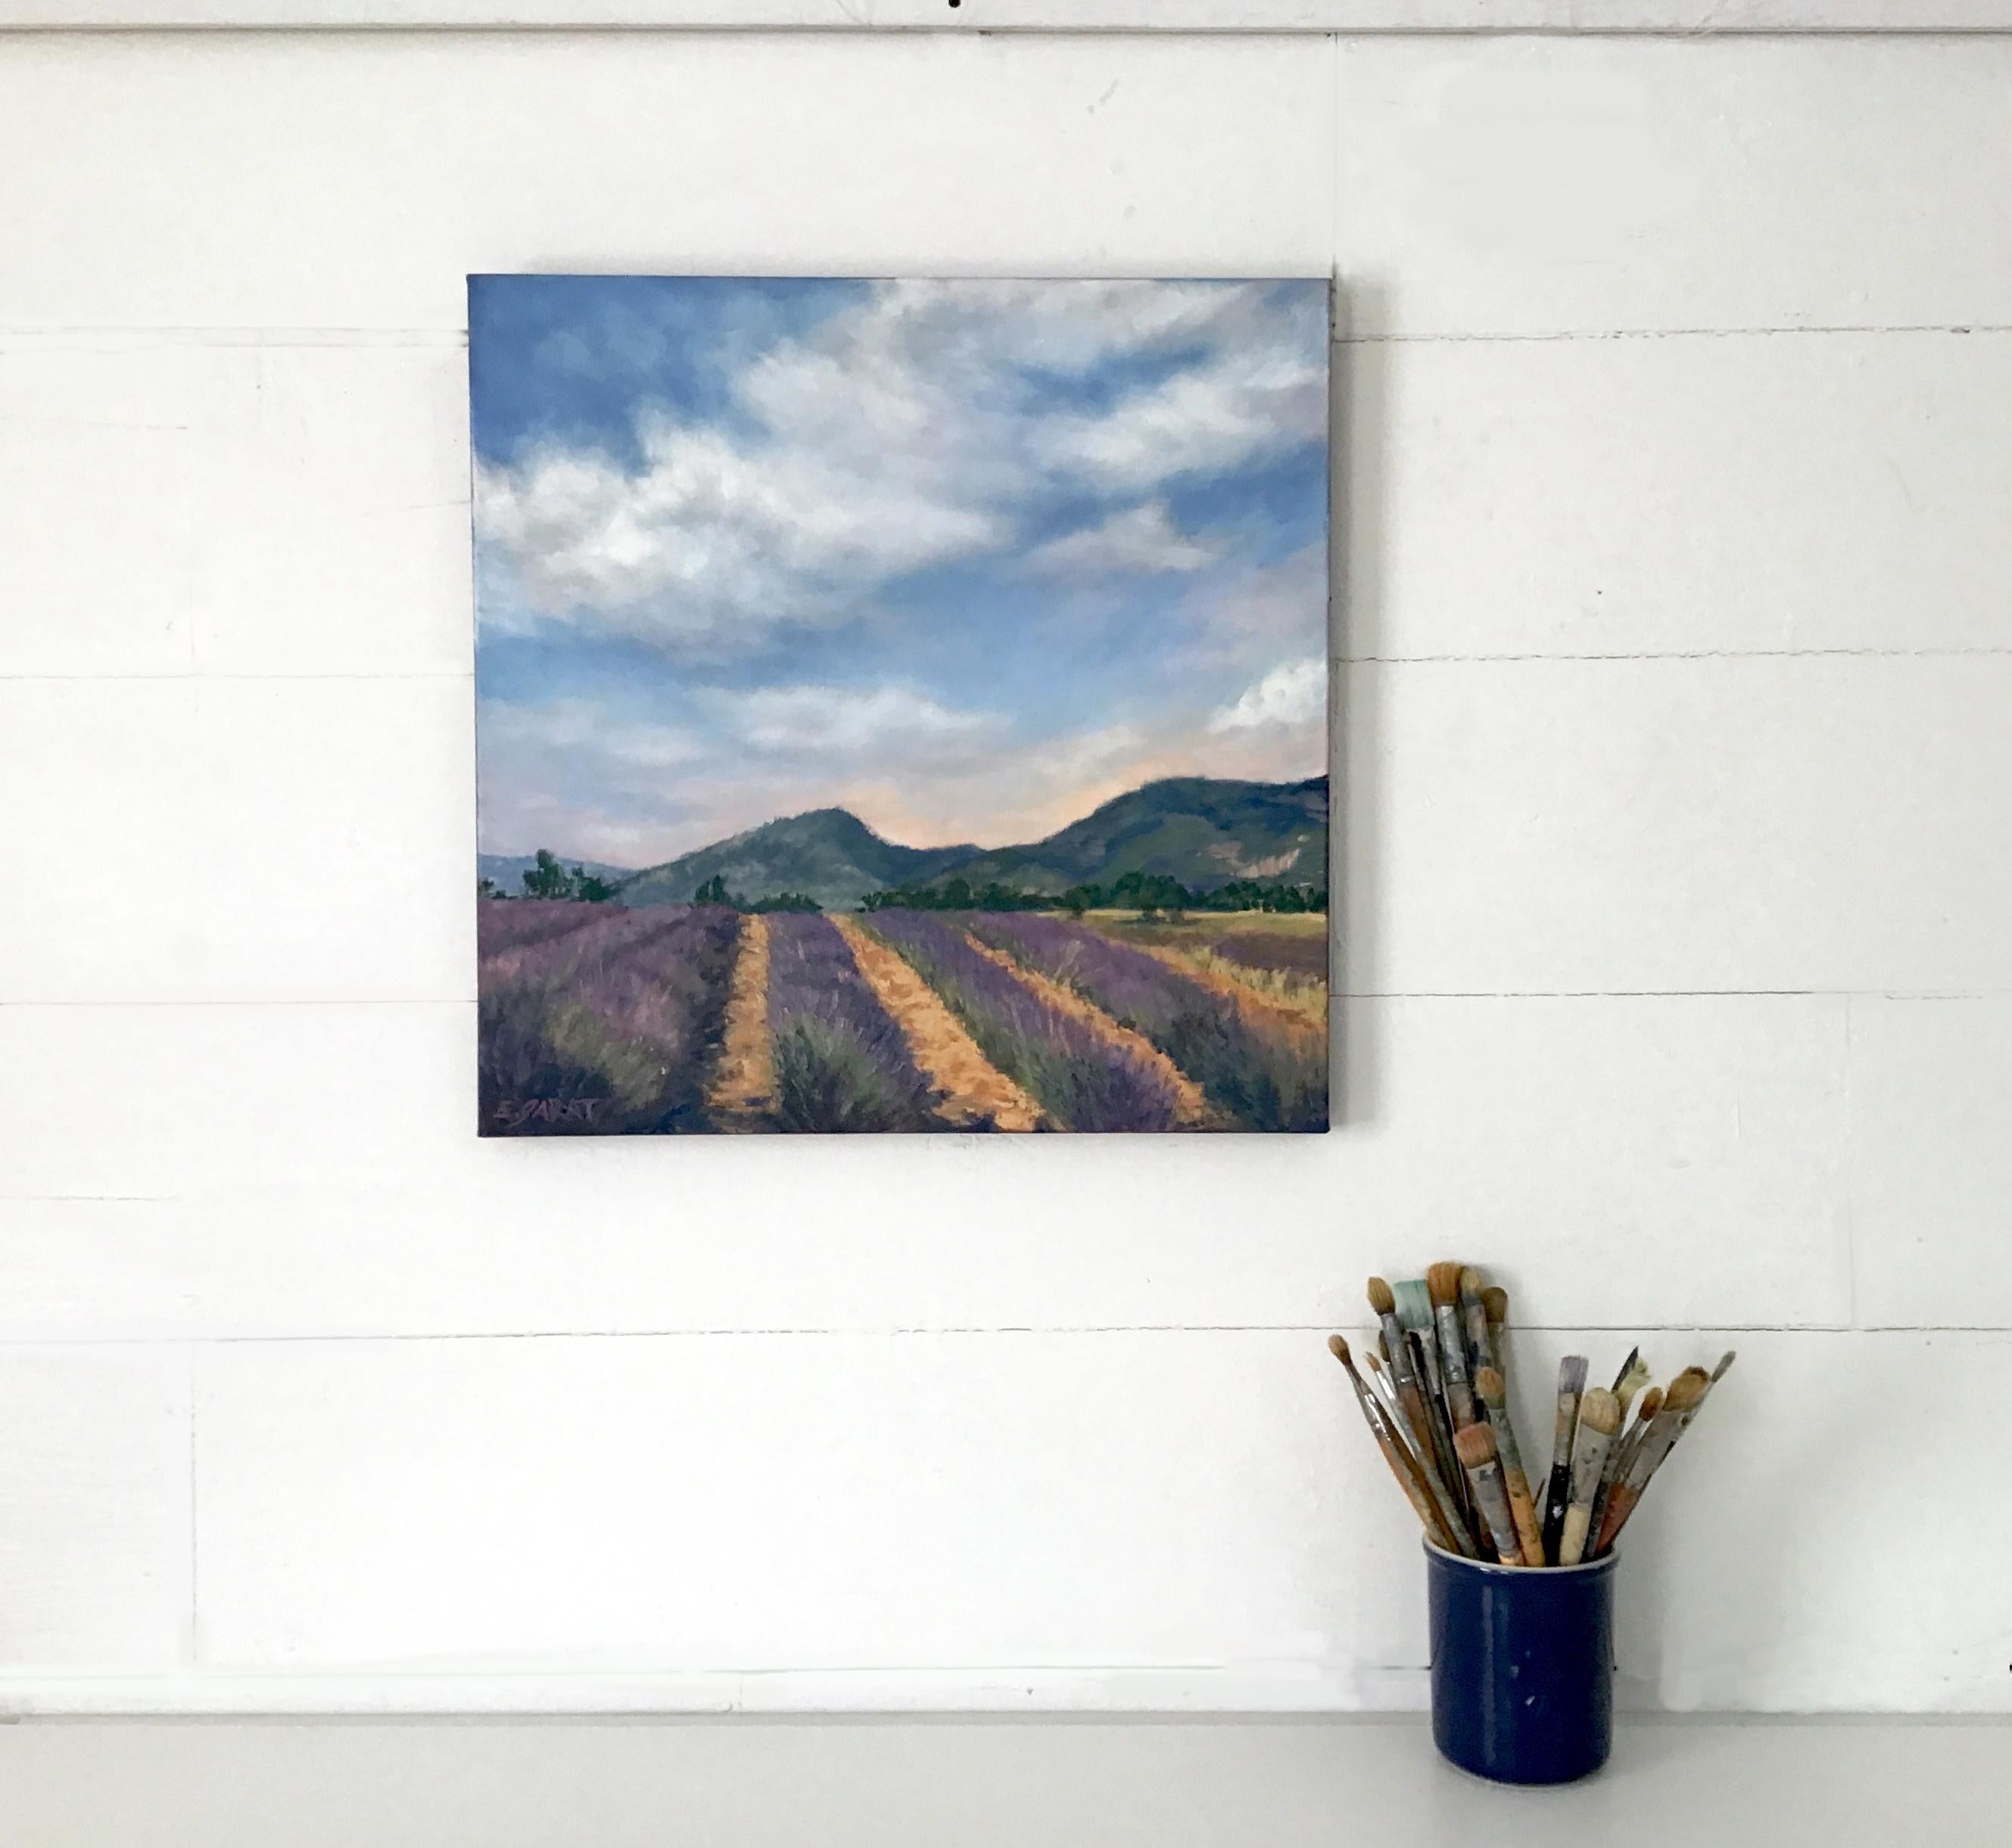 <p>Artist Comments<br>Artist Elizabeth Garat presents an impressionist landscape of lavender fields. The piece recalls a warm day in July during the height of summer. Billowy clouds in pink and blue hues stretch the horizon in a beautiful display of